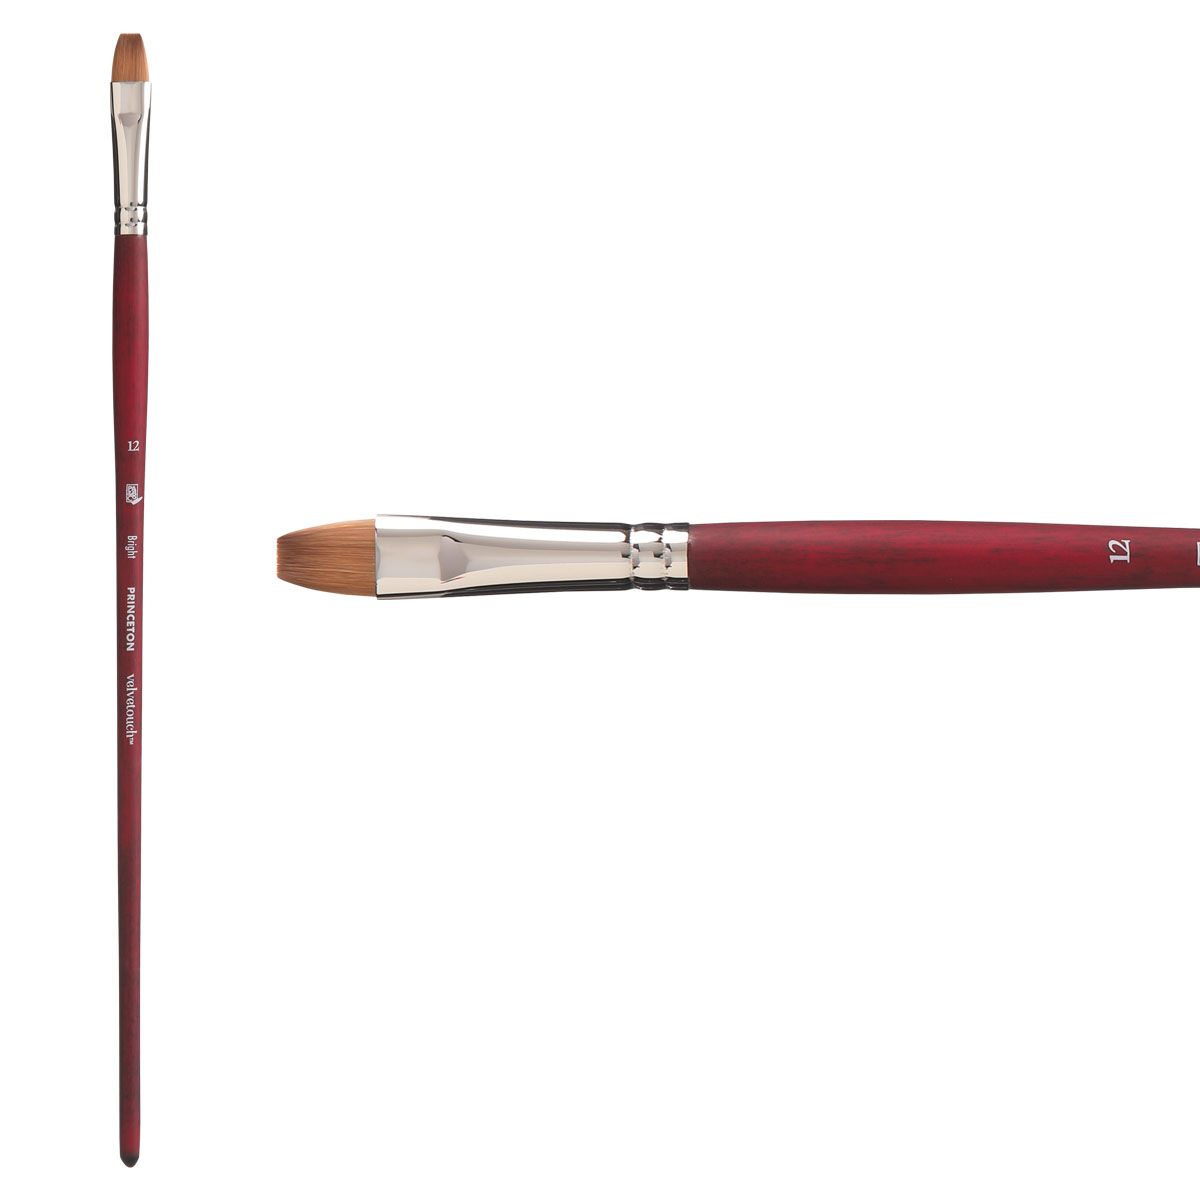 Velvetouch Synthetic Long Handle Series 3900 Brush, Bright Size #12